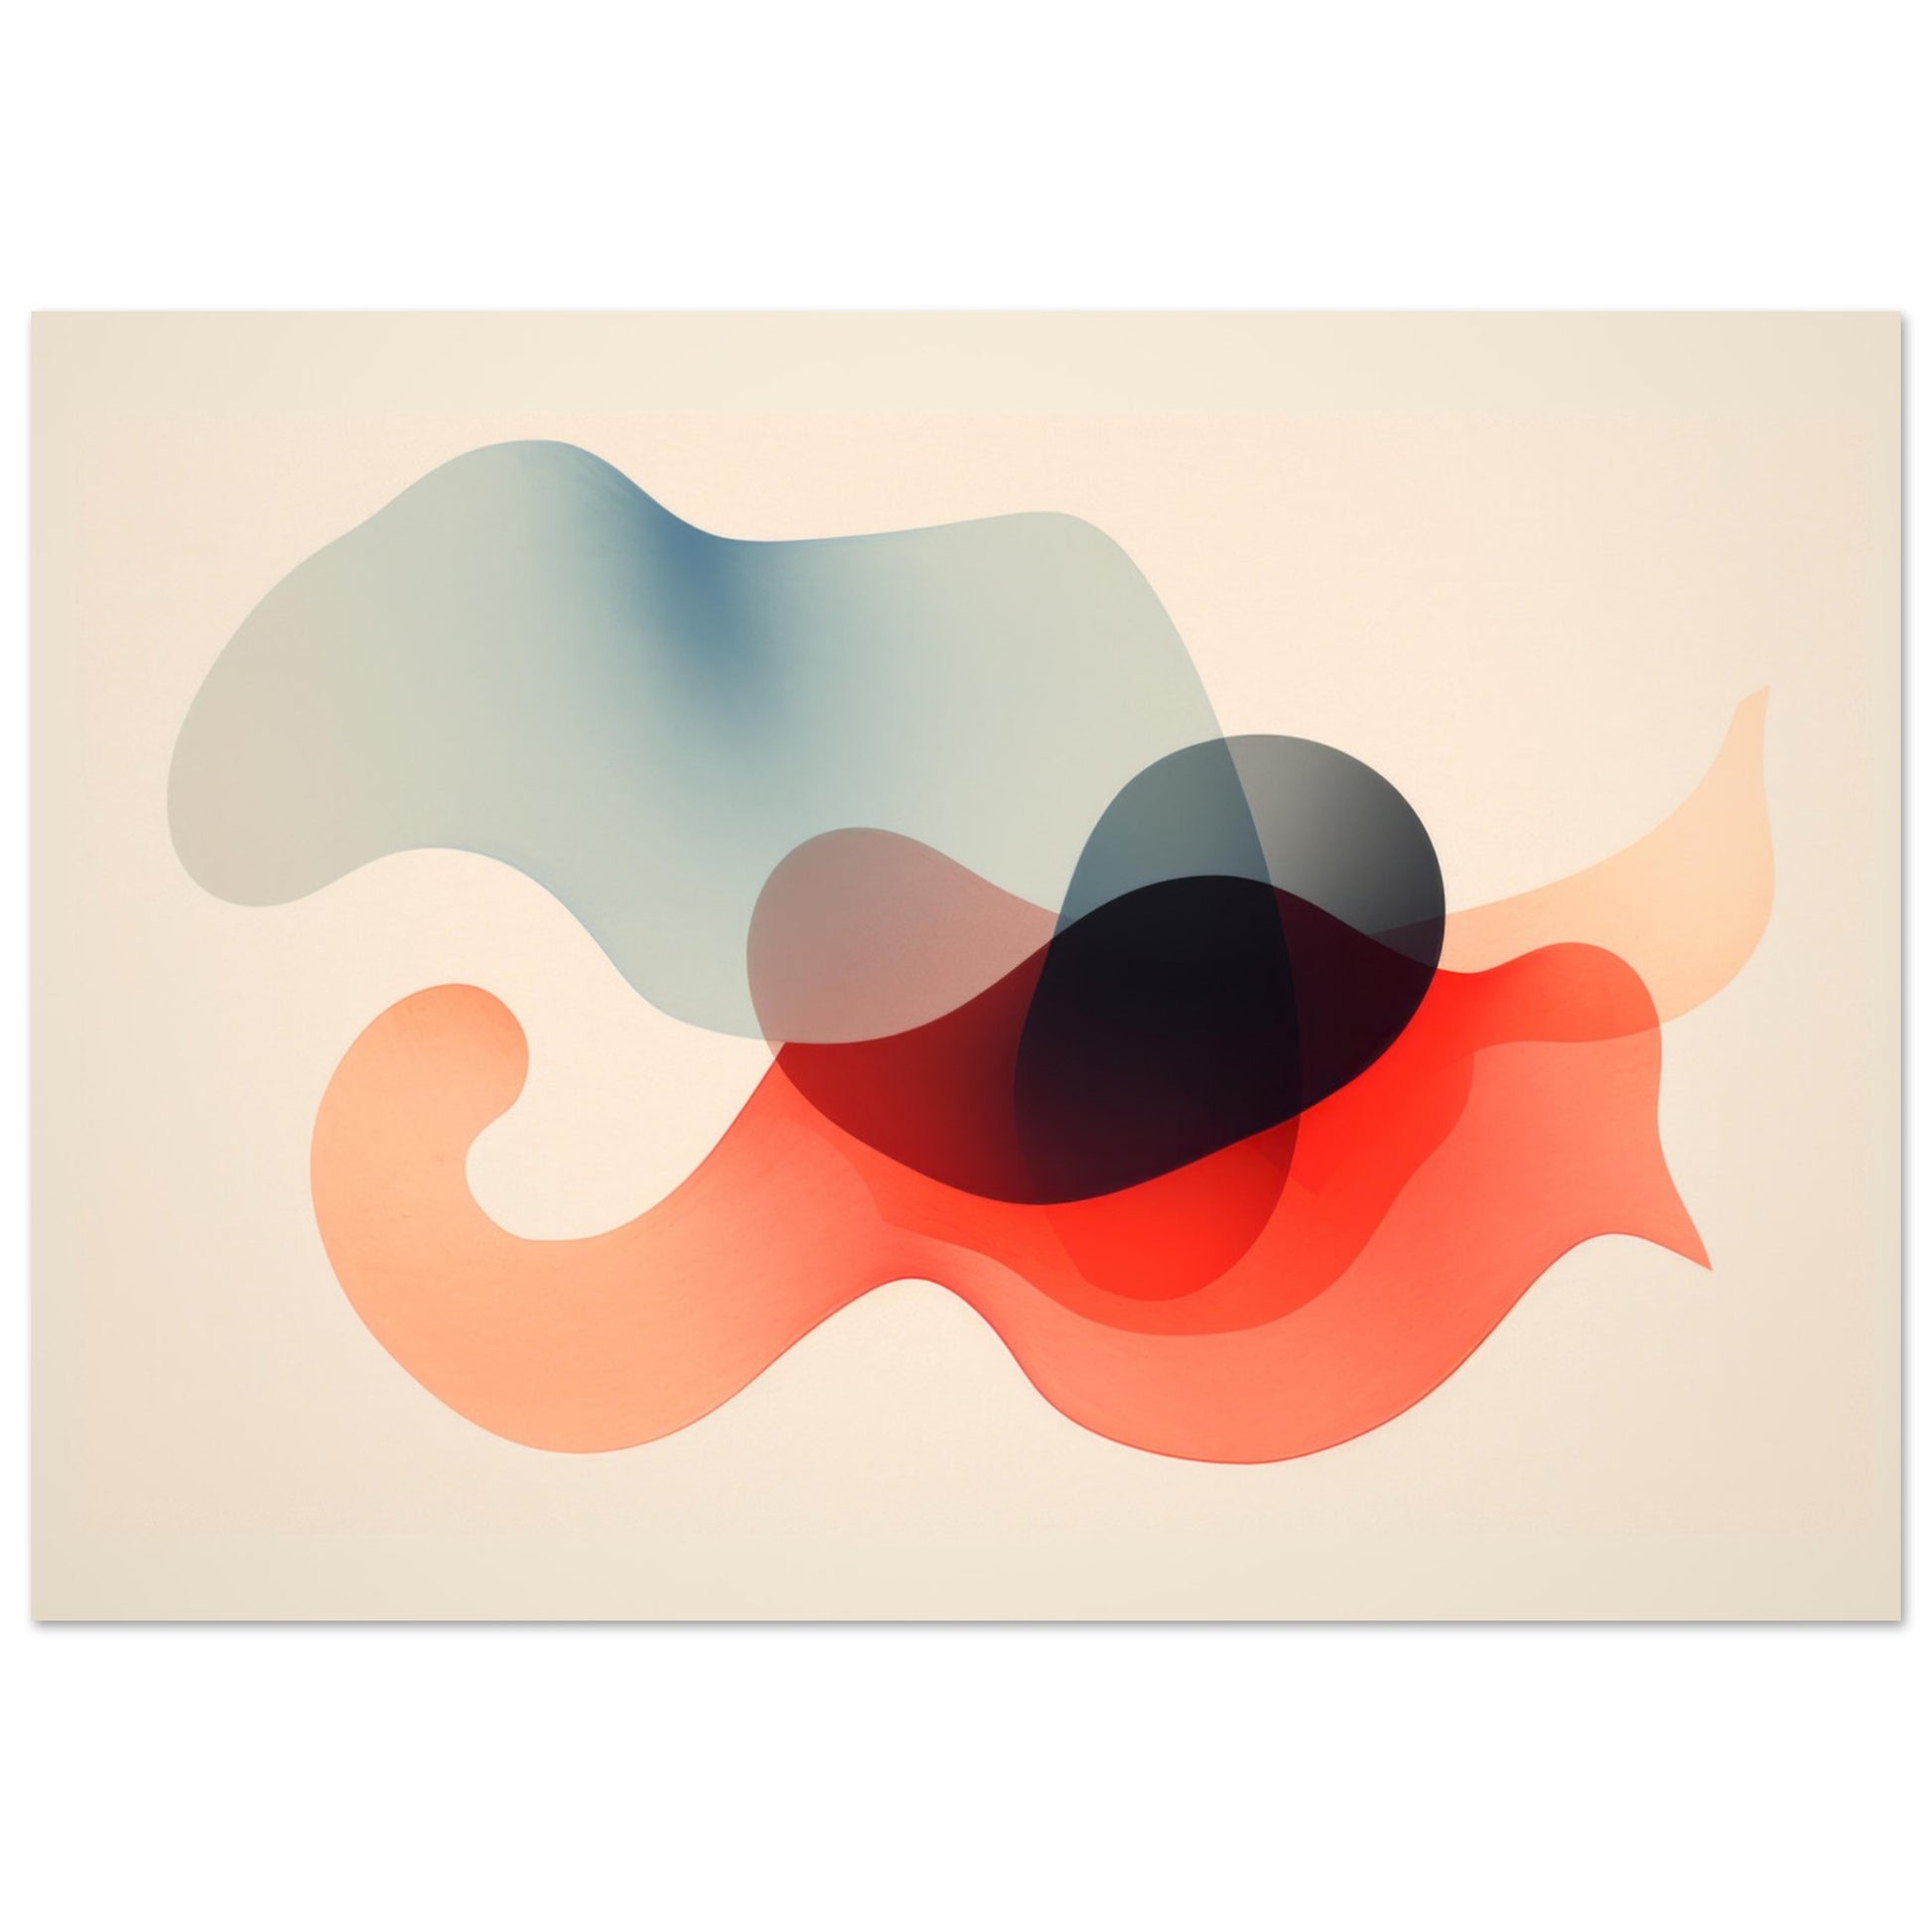 A modern, minimalist art print titled "Emulsion" that encapsulates the elegance of contemporary design. Ideal for adding a touch of sophistication to any wall decor setting.